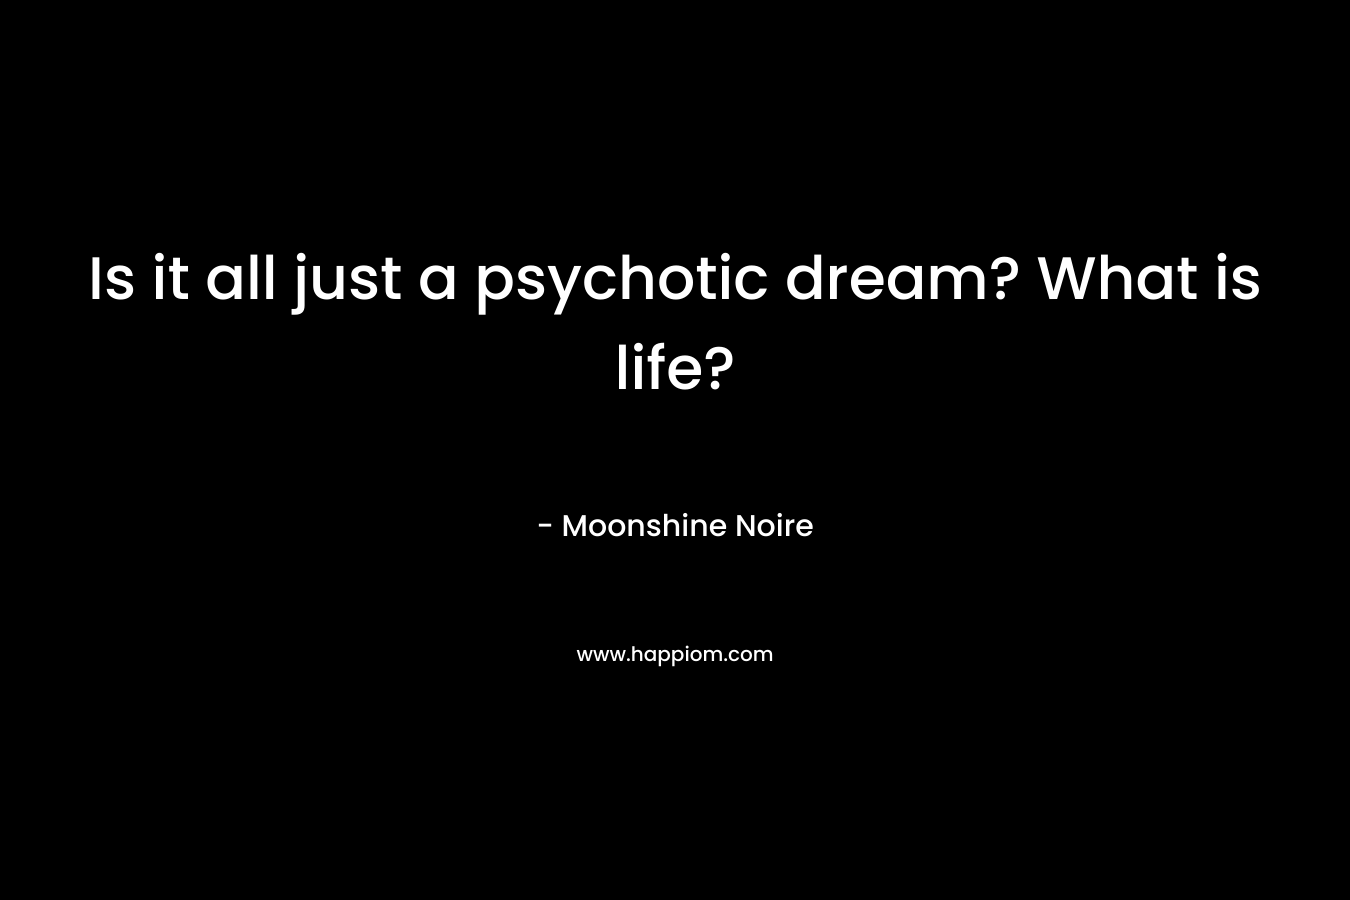 Is it all just a psychotic dream? What is life? – Moonshine Noire